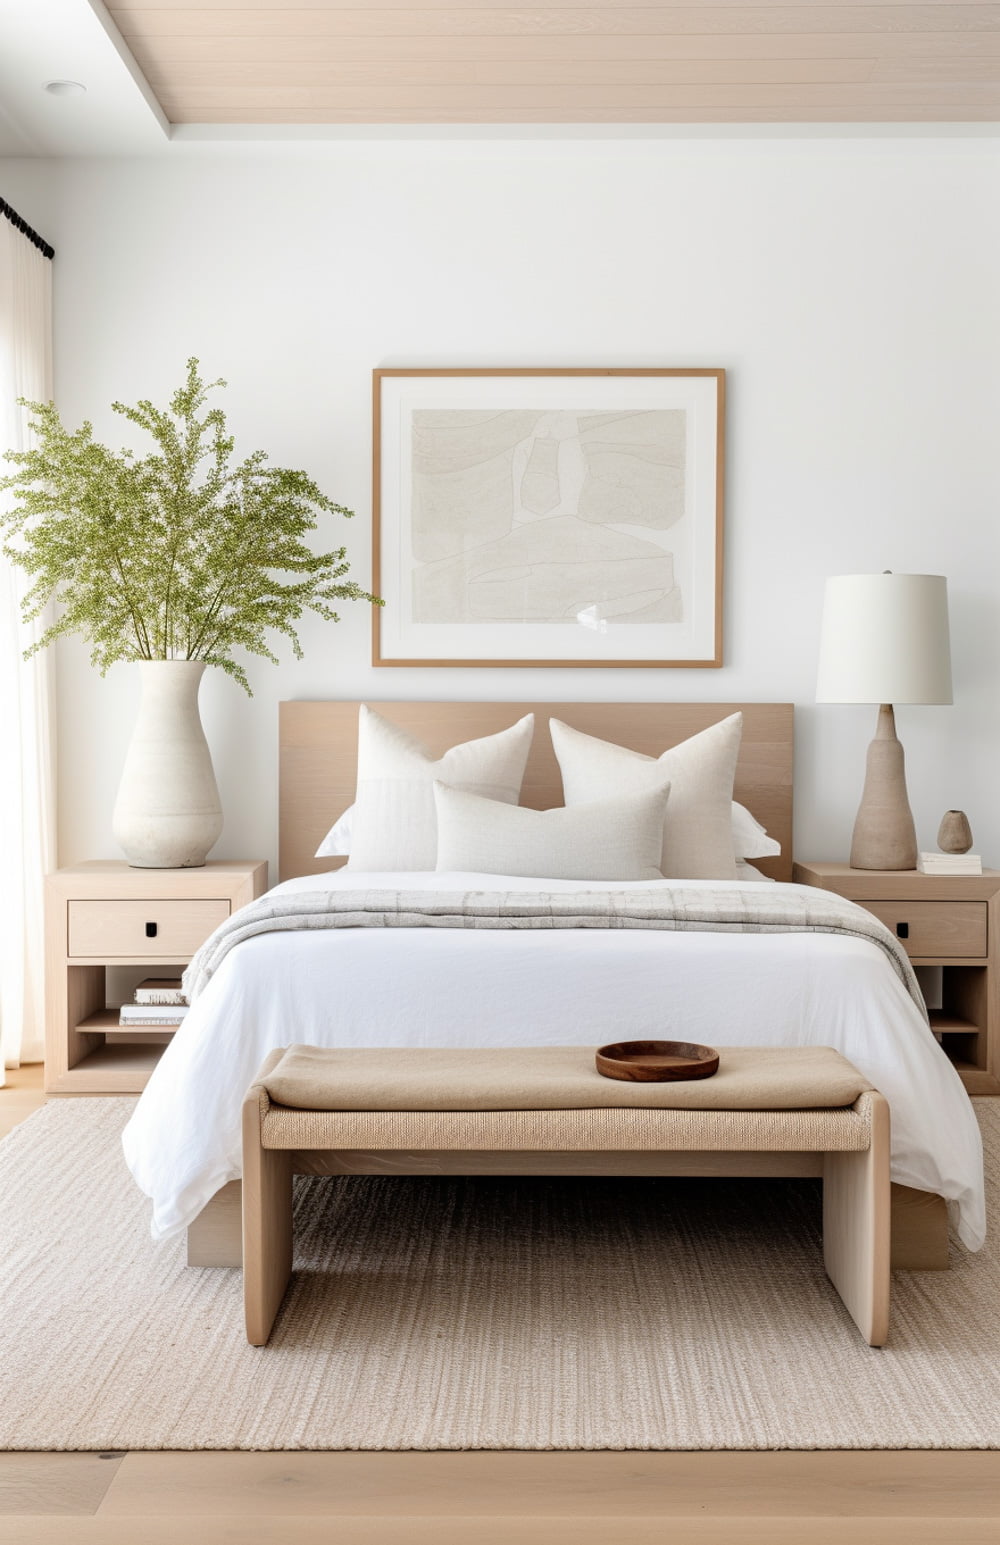 Neutral guest bedroom with bed in the center and neutral bedroom decor. Wooden nightstands flank each side of the bed and a tan upholstered bench sits at the foot of the bed.